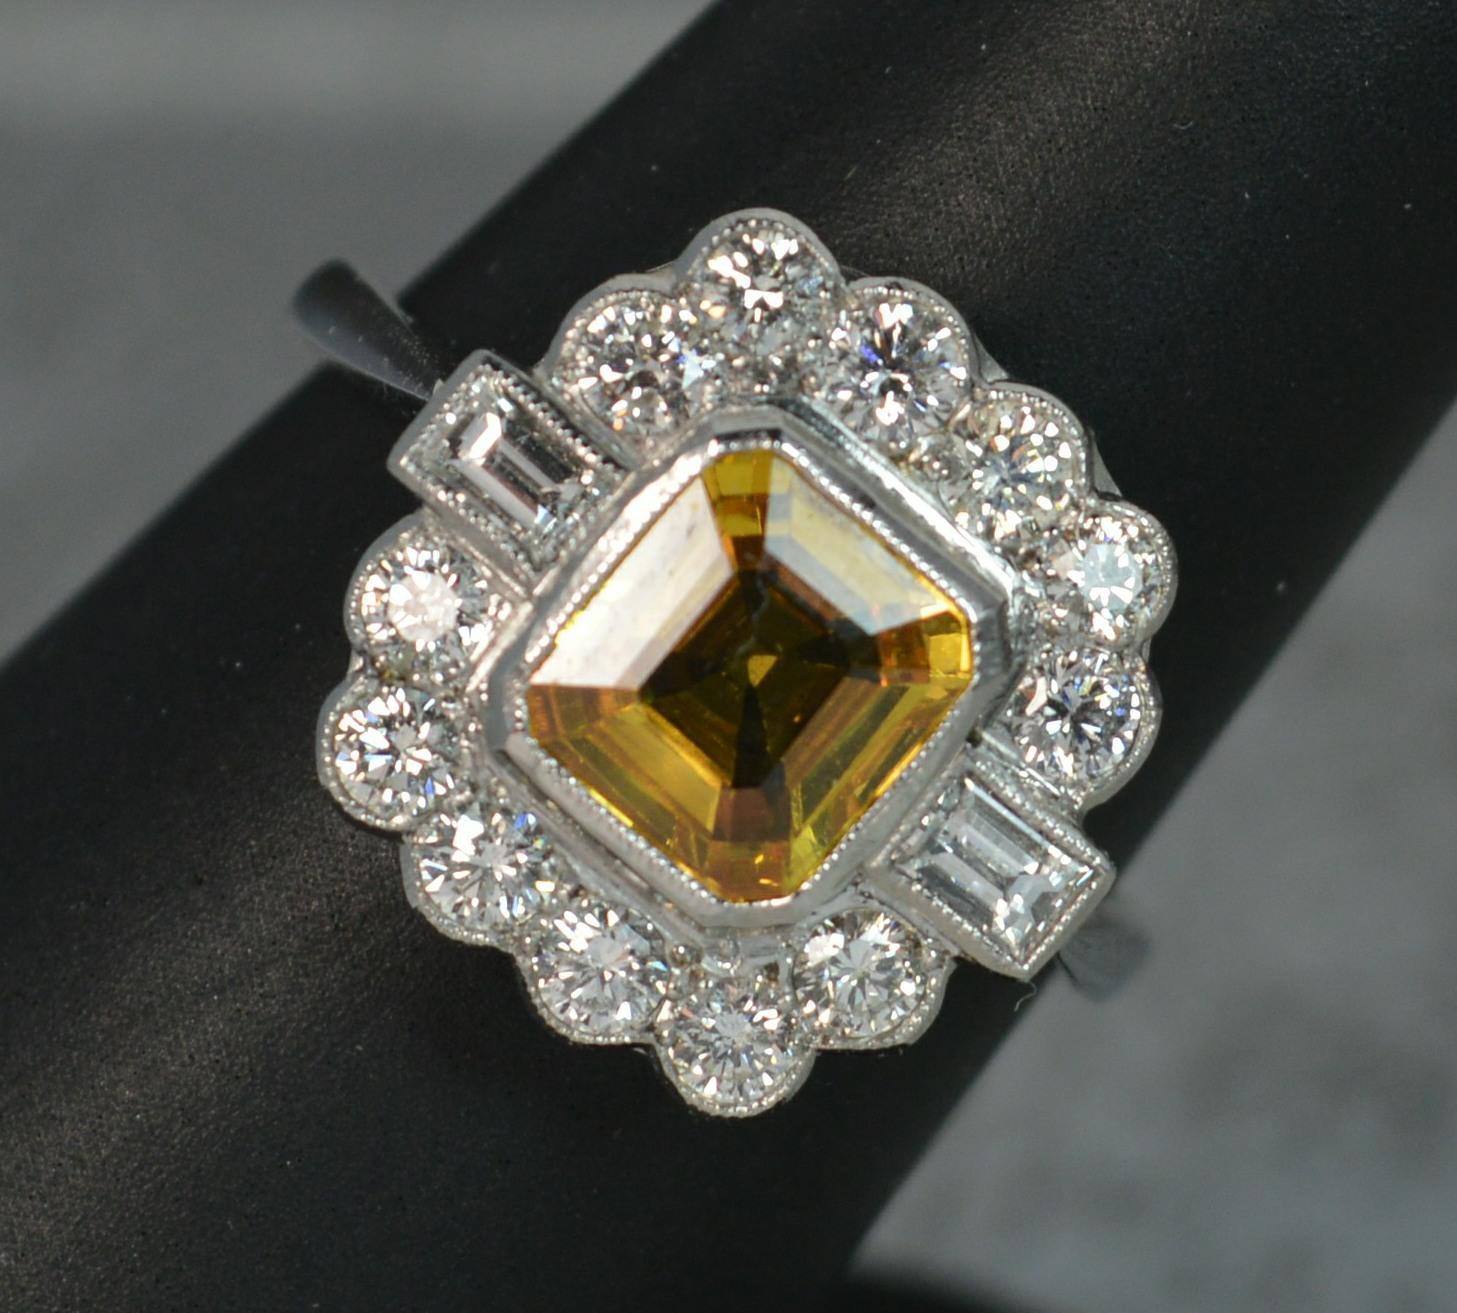 A stunning quality Yellow Sapphire and Diamond ring in Platinum.
​Designed with a cushion cut natural yellow sapphire to centre. Superb vivid colour. 6.6mm x 7.2mm, 1.2 carats. Surrounding are ten round brilliant cut diamonds and two baguette cut